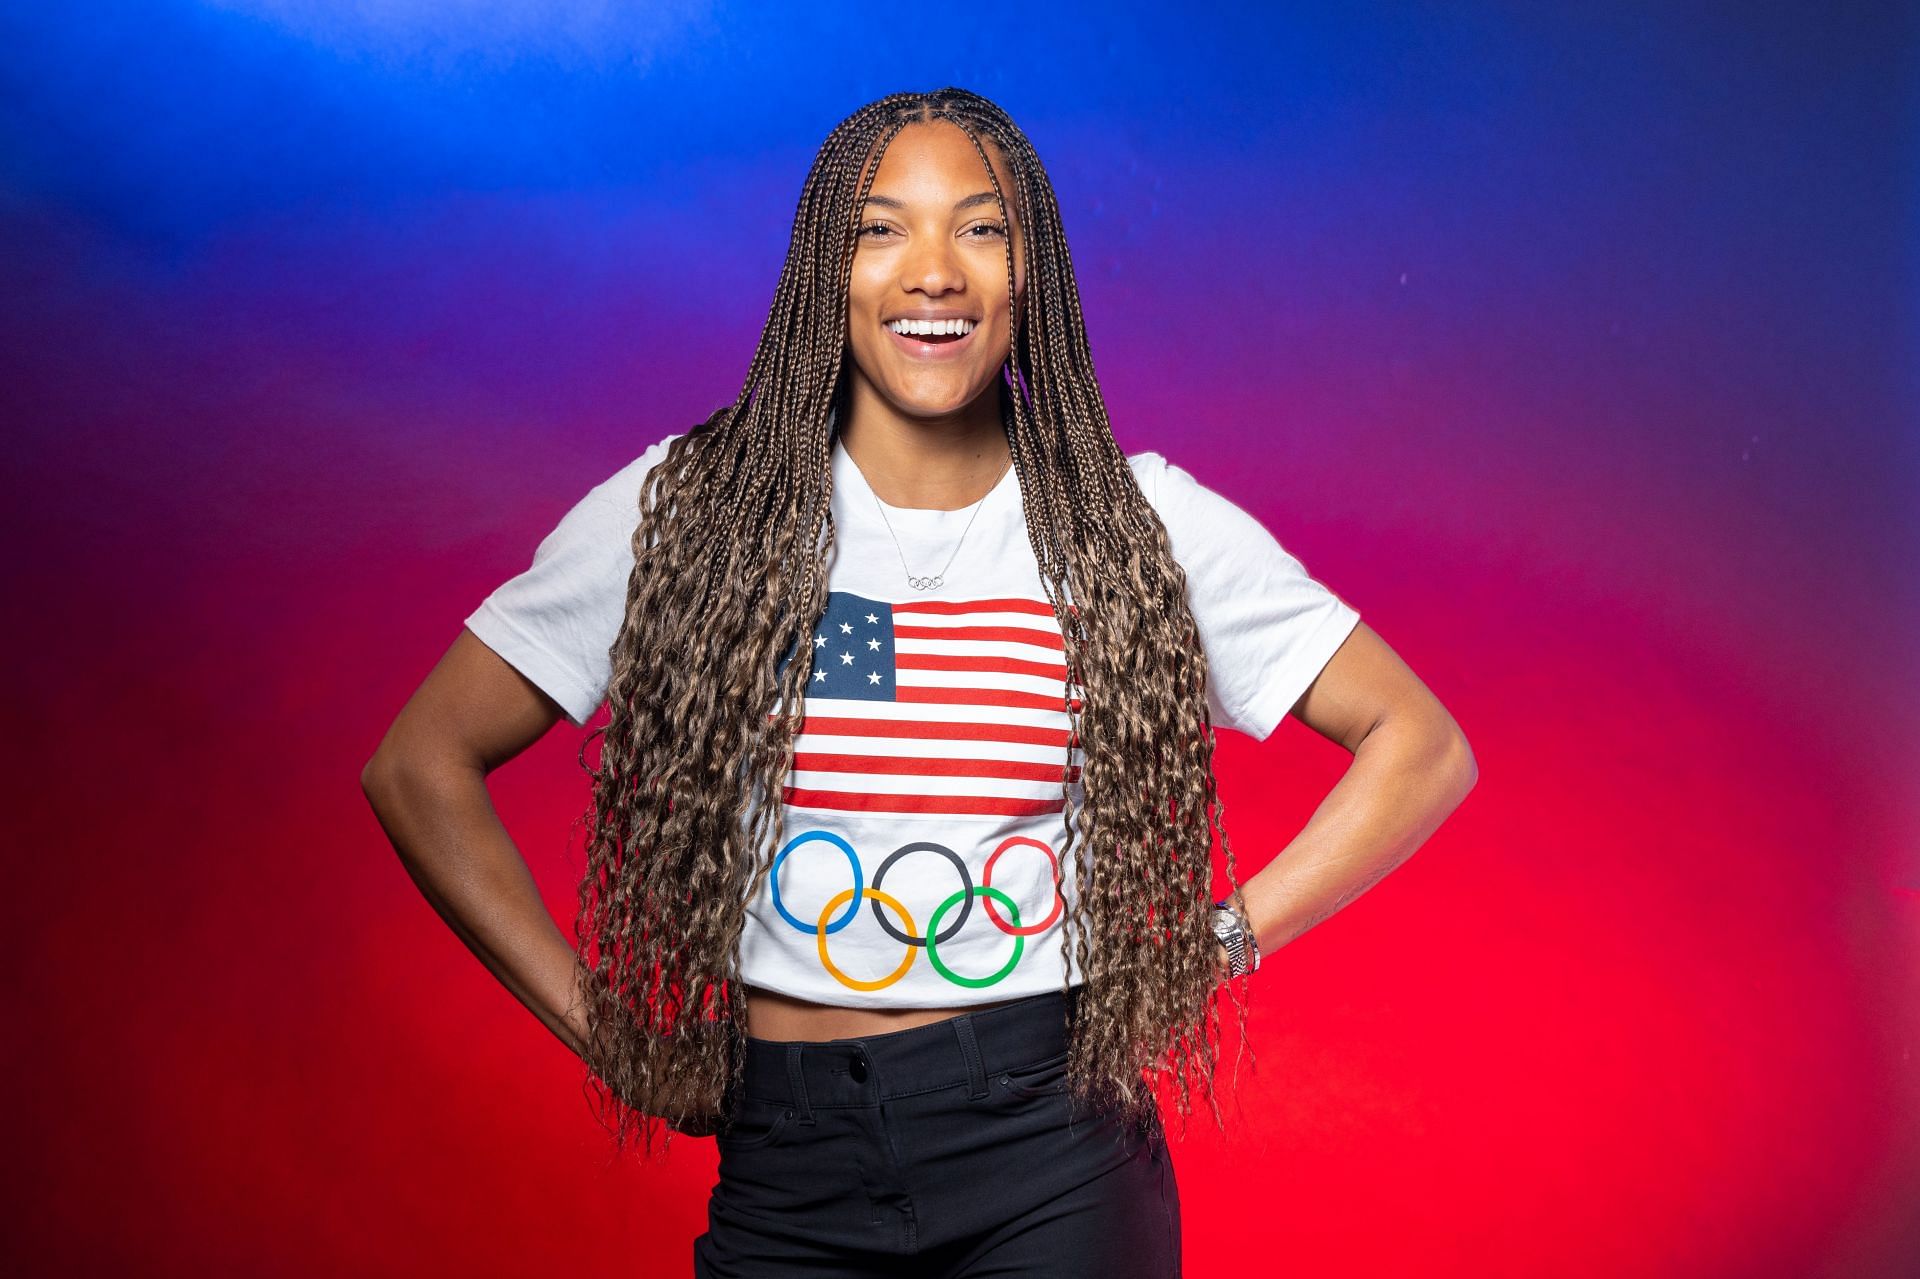 Tara Davis-Woodhall poses for a portrait during the 2024 Team USA Media Summit at the Marriott Marquis Hotel in New York City.